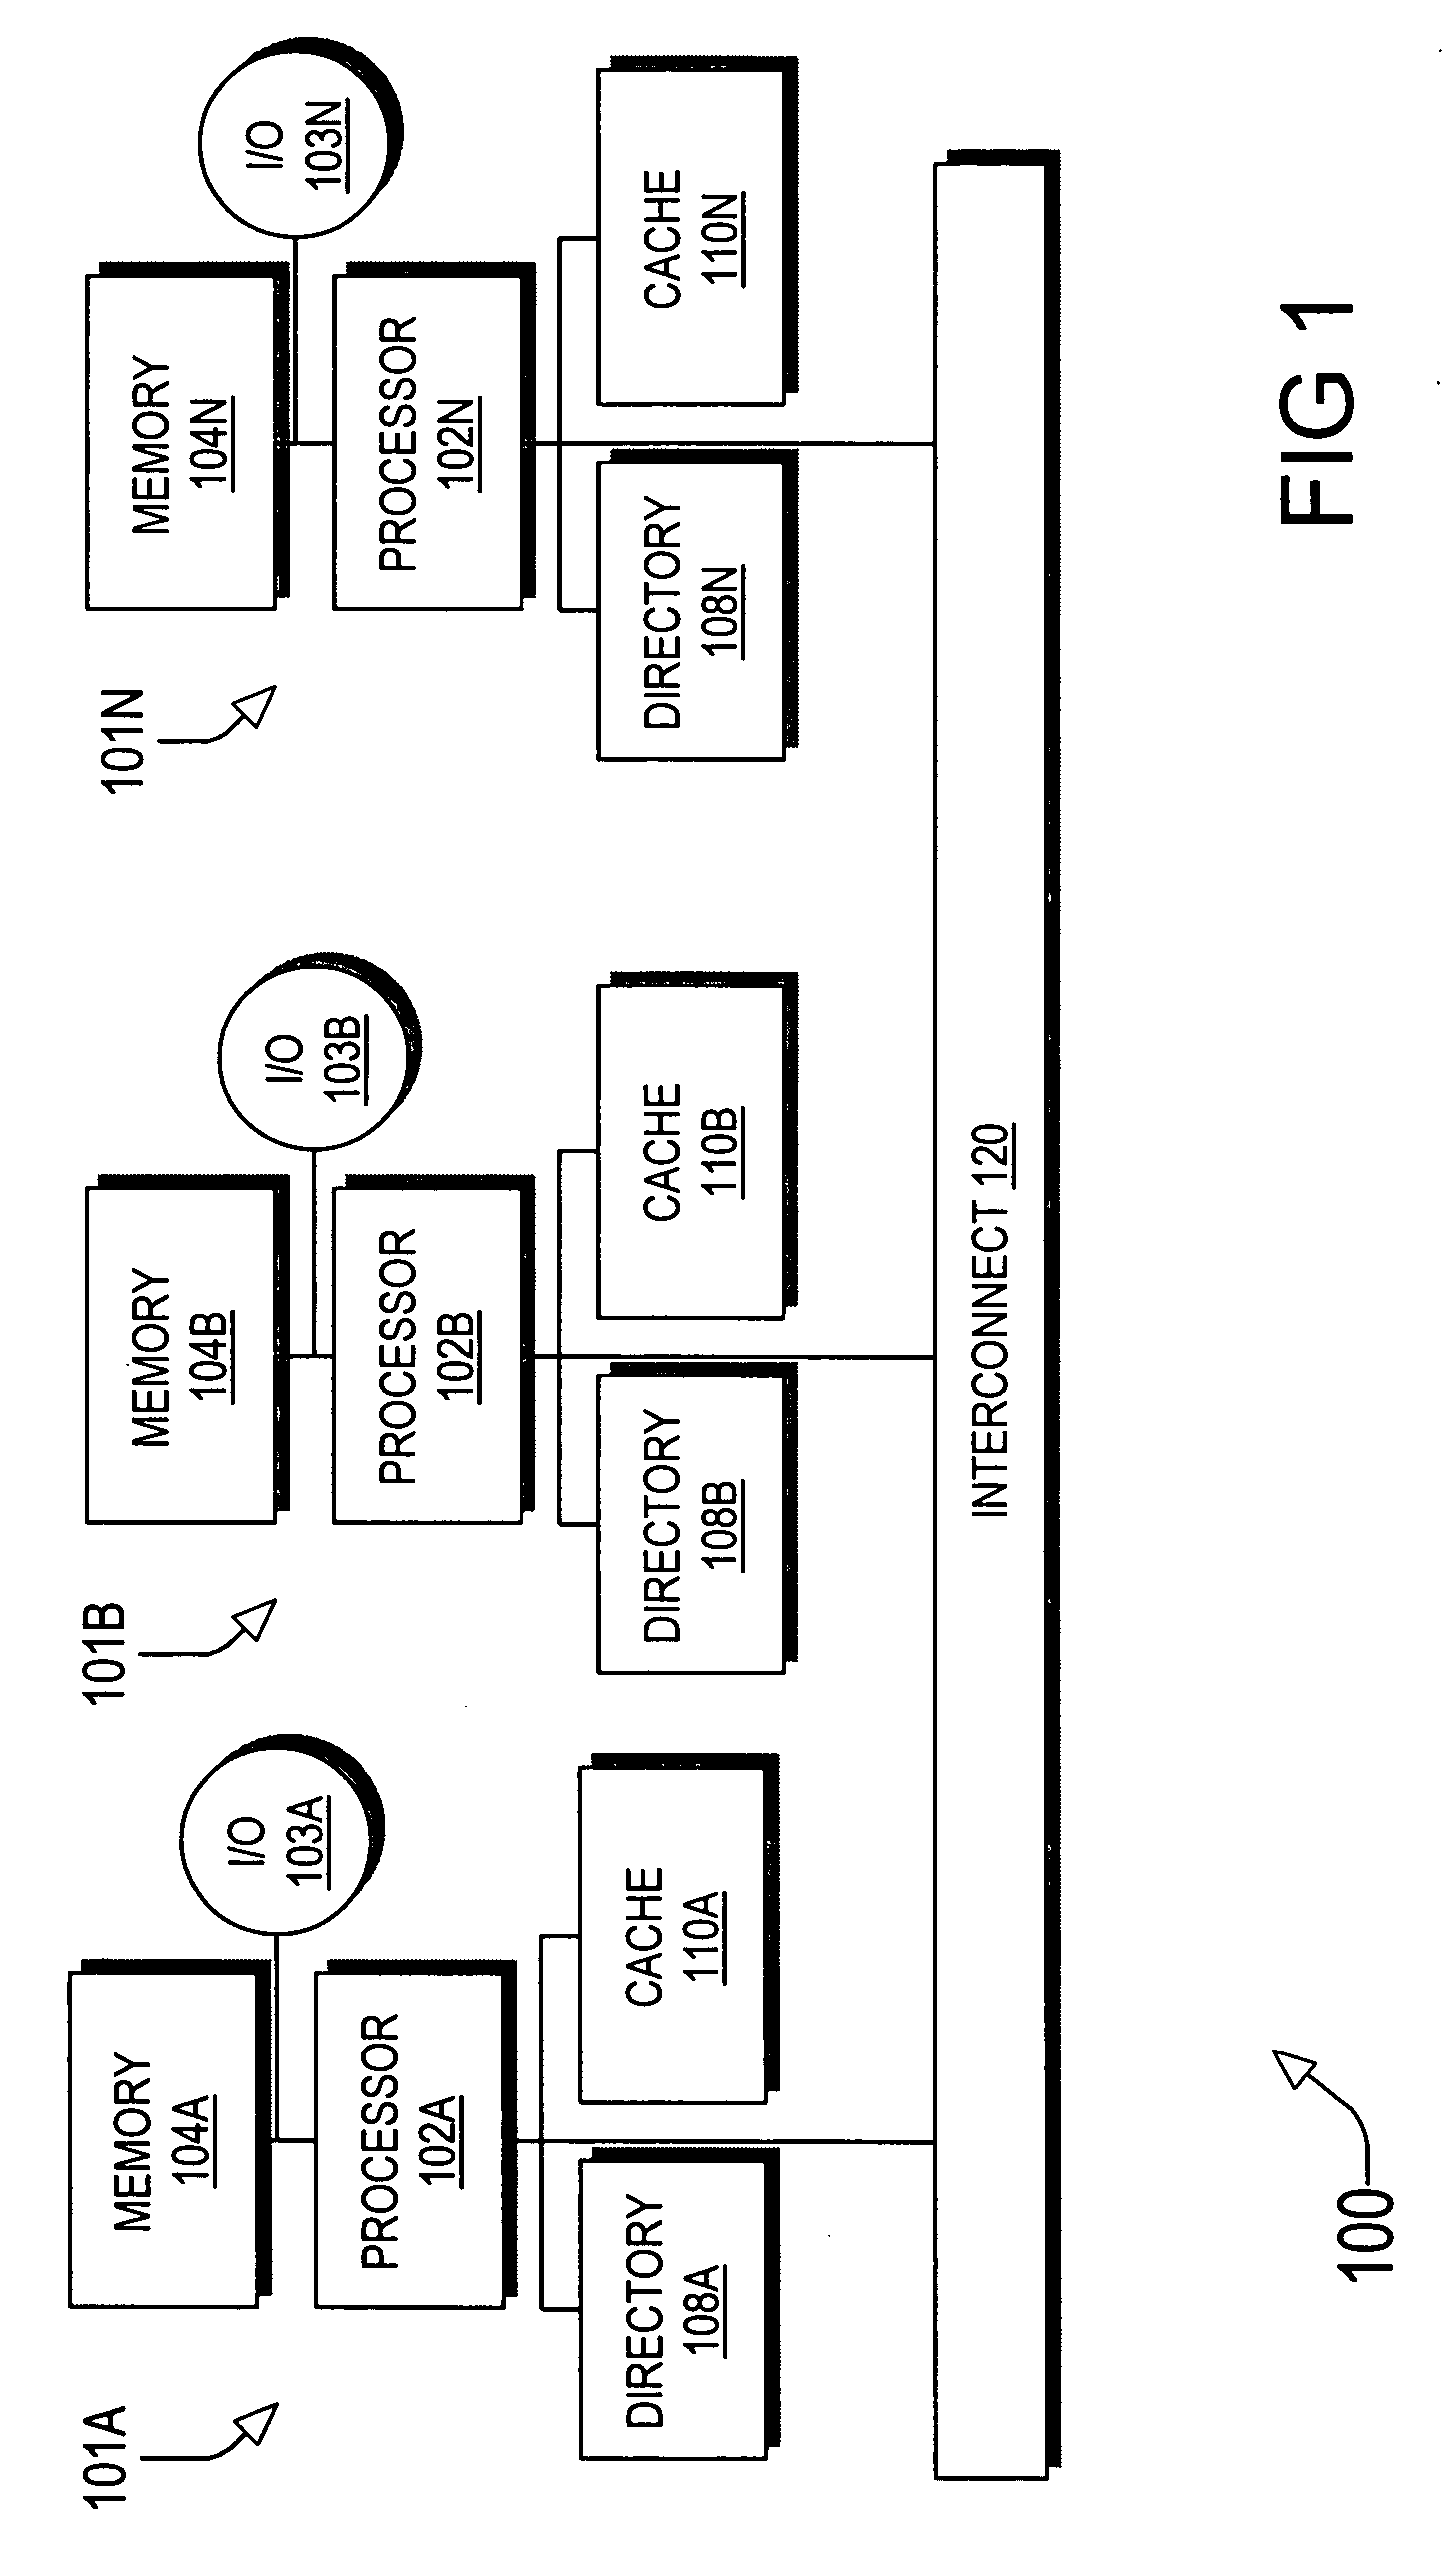 Directory based support for function shipping in a multiprocessor system